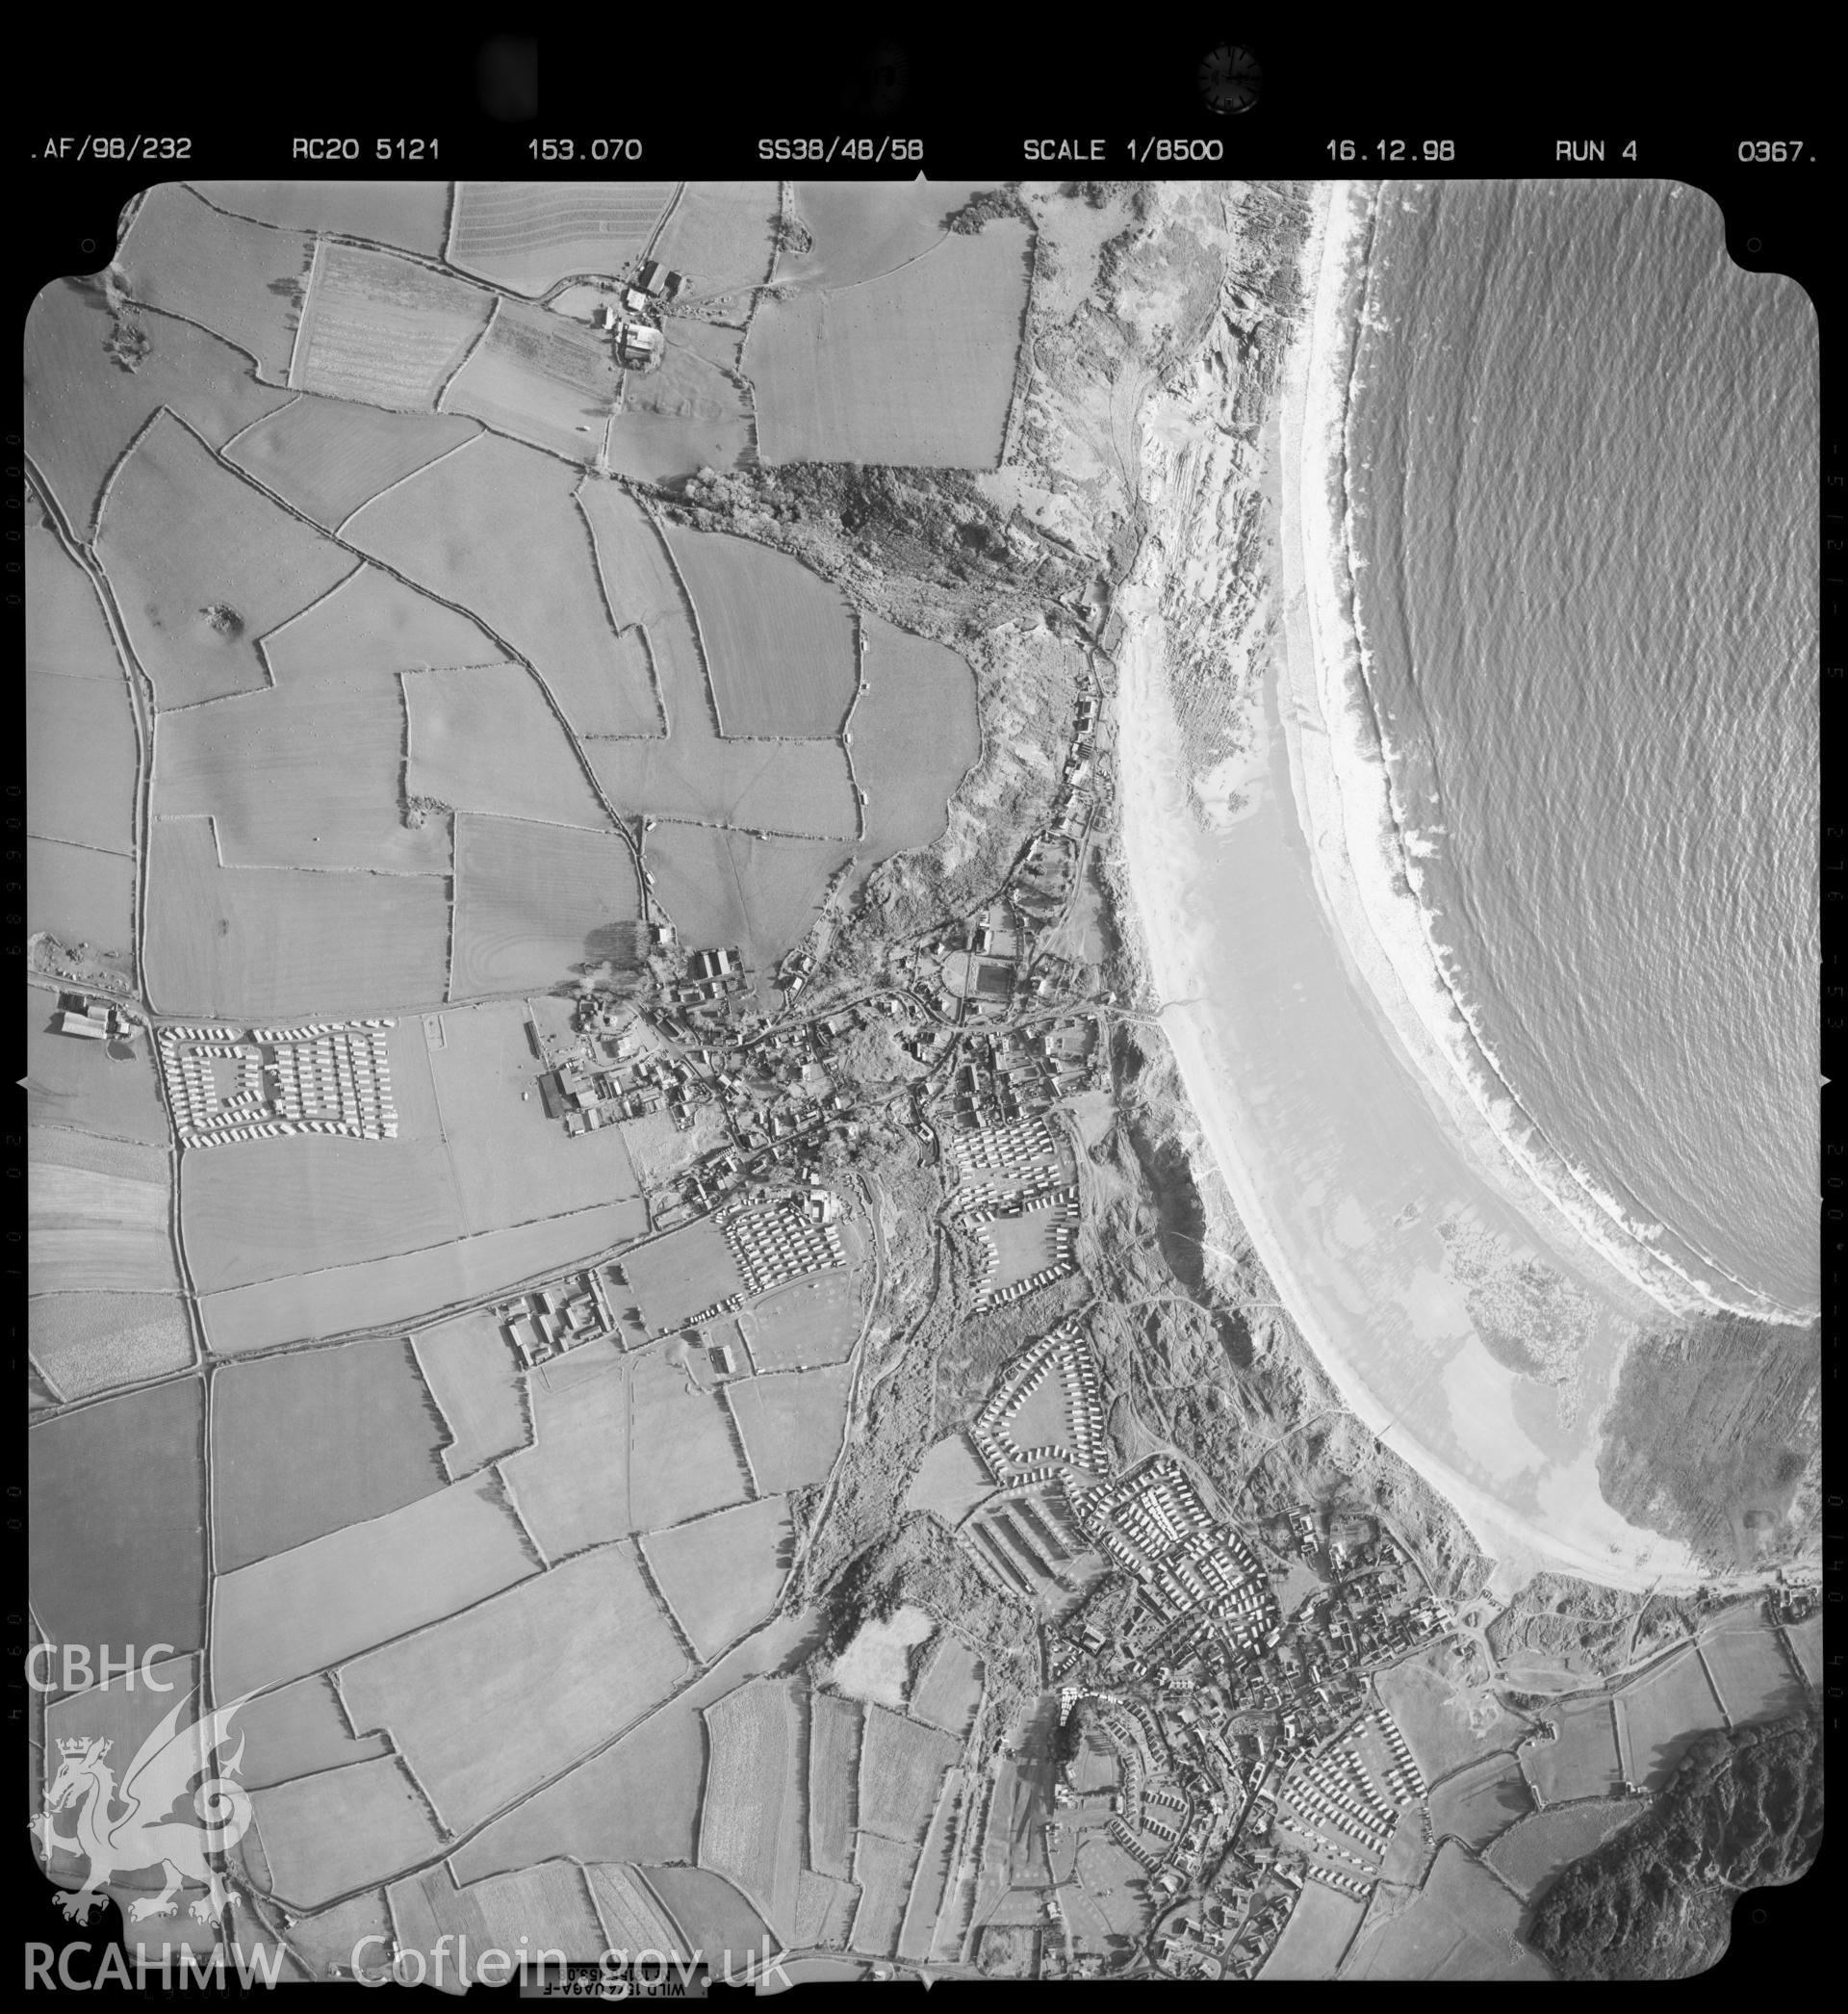 Digitized copy of an aerial photograph showing the area around Port Eynon, Gower, taken by Ordnance Survey, 1998.